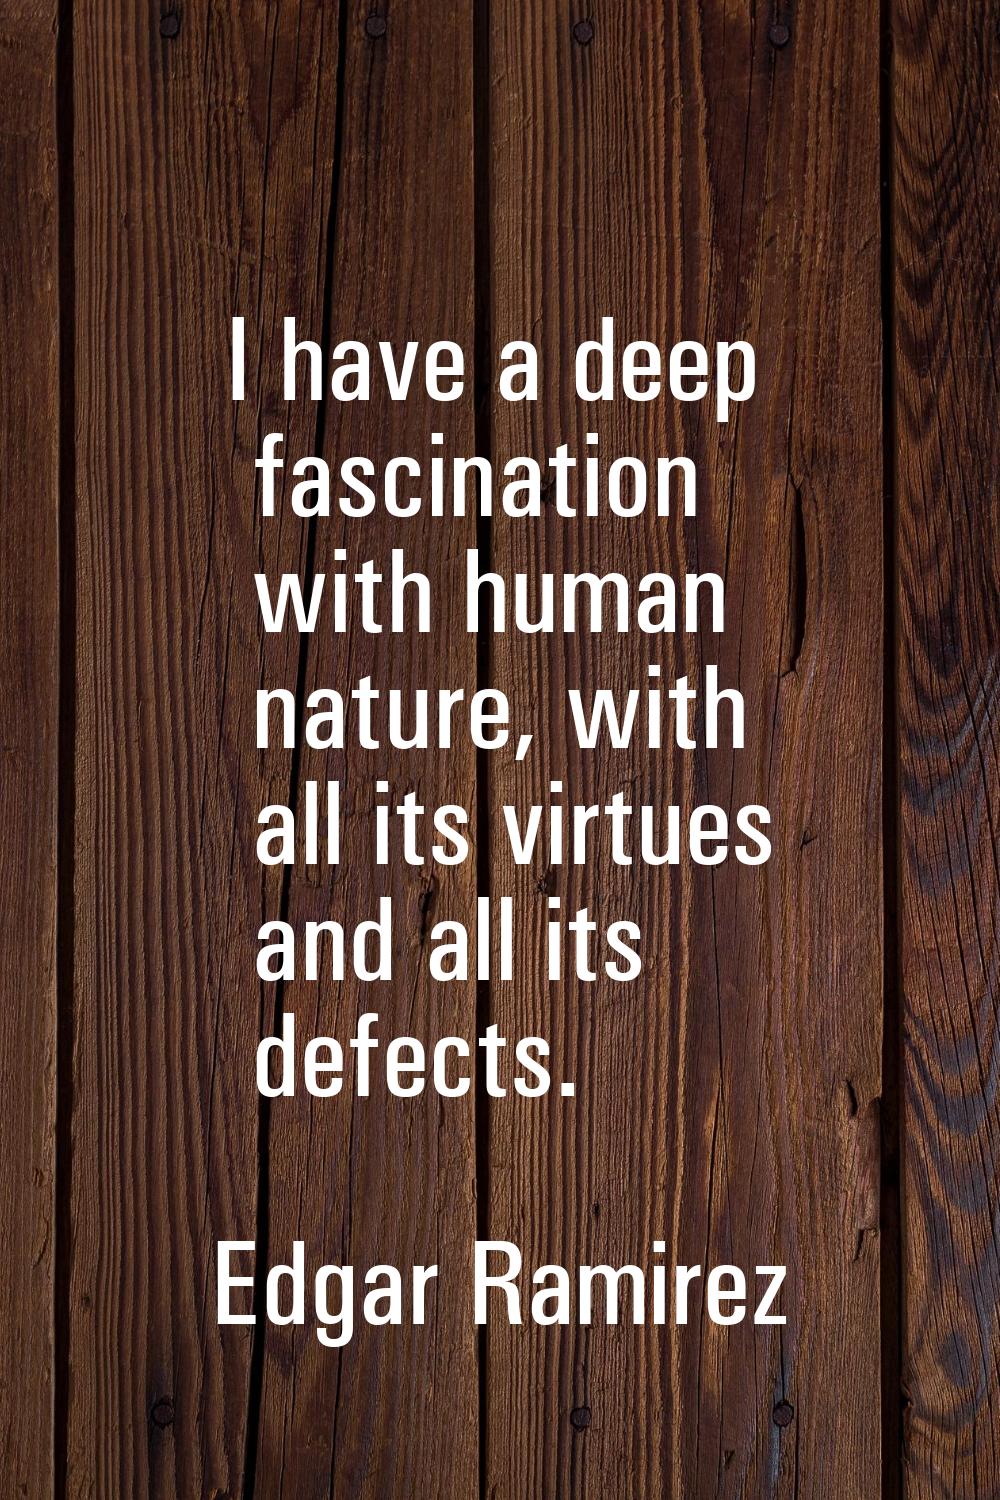 I have a deep fascination with human nature, with all its virtues and all its defects.